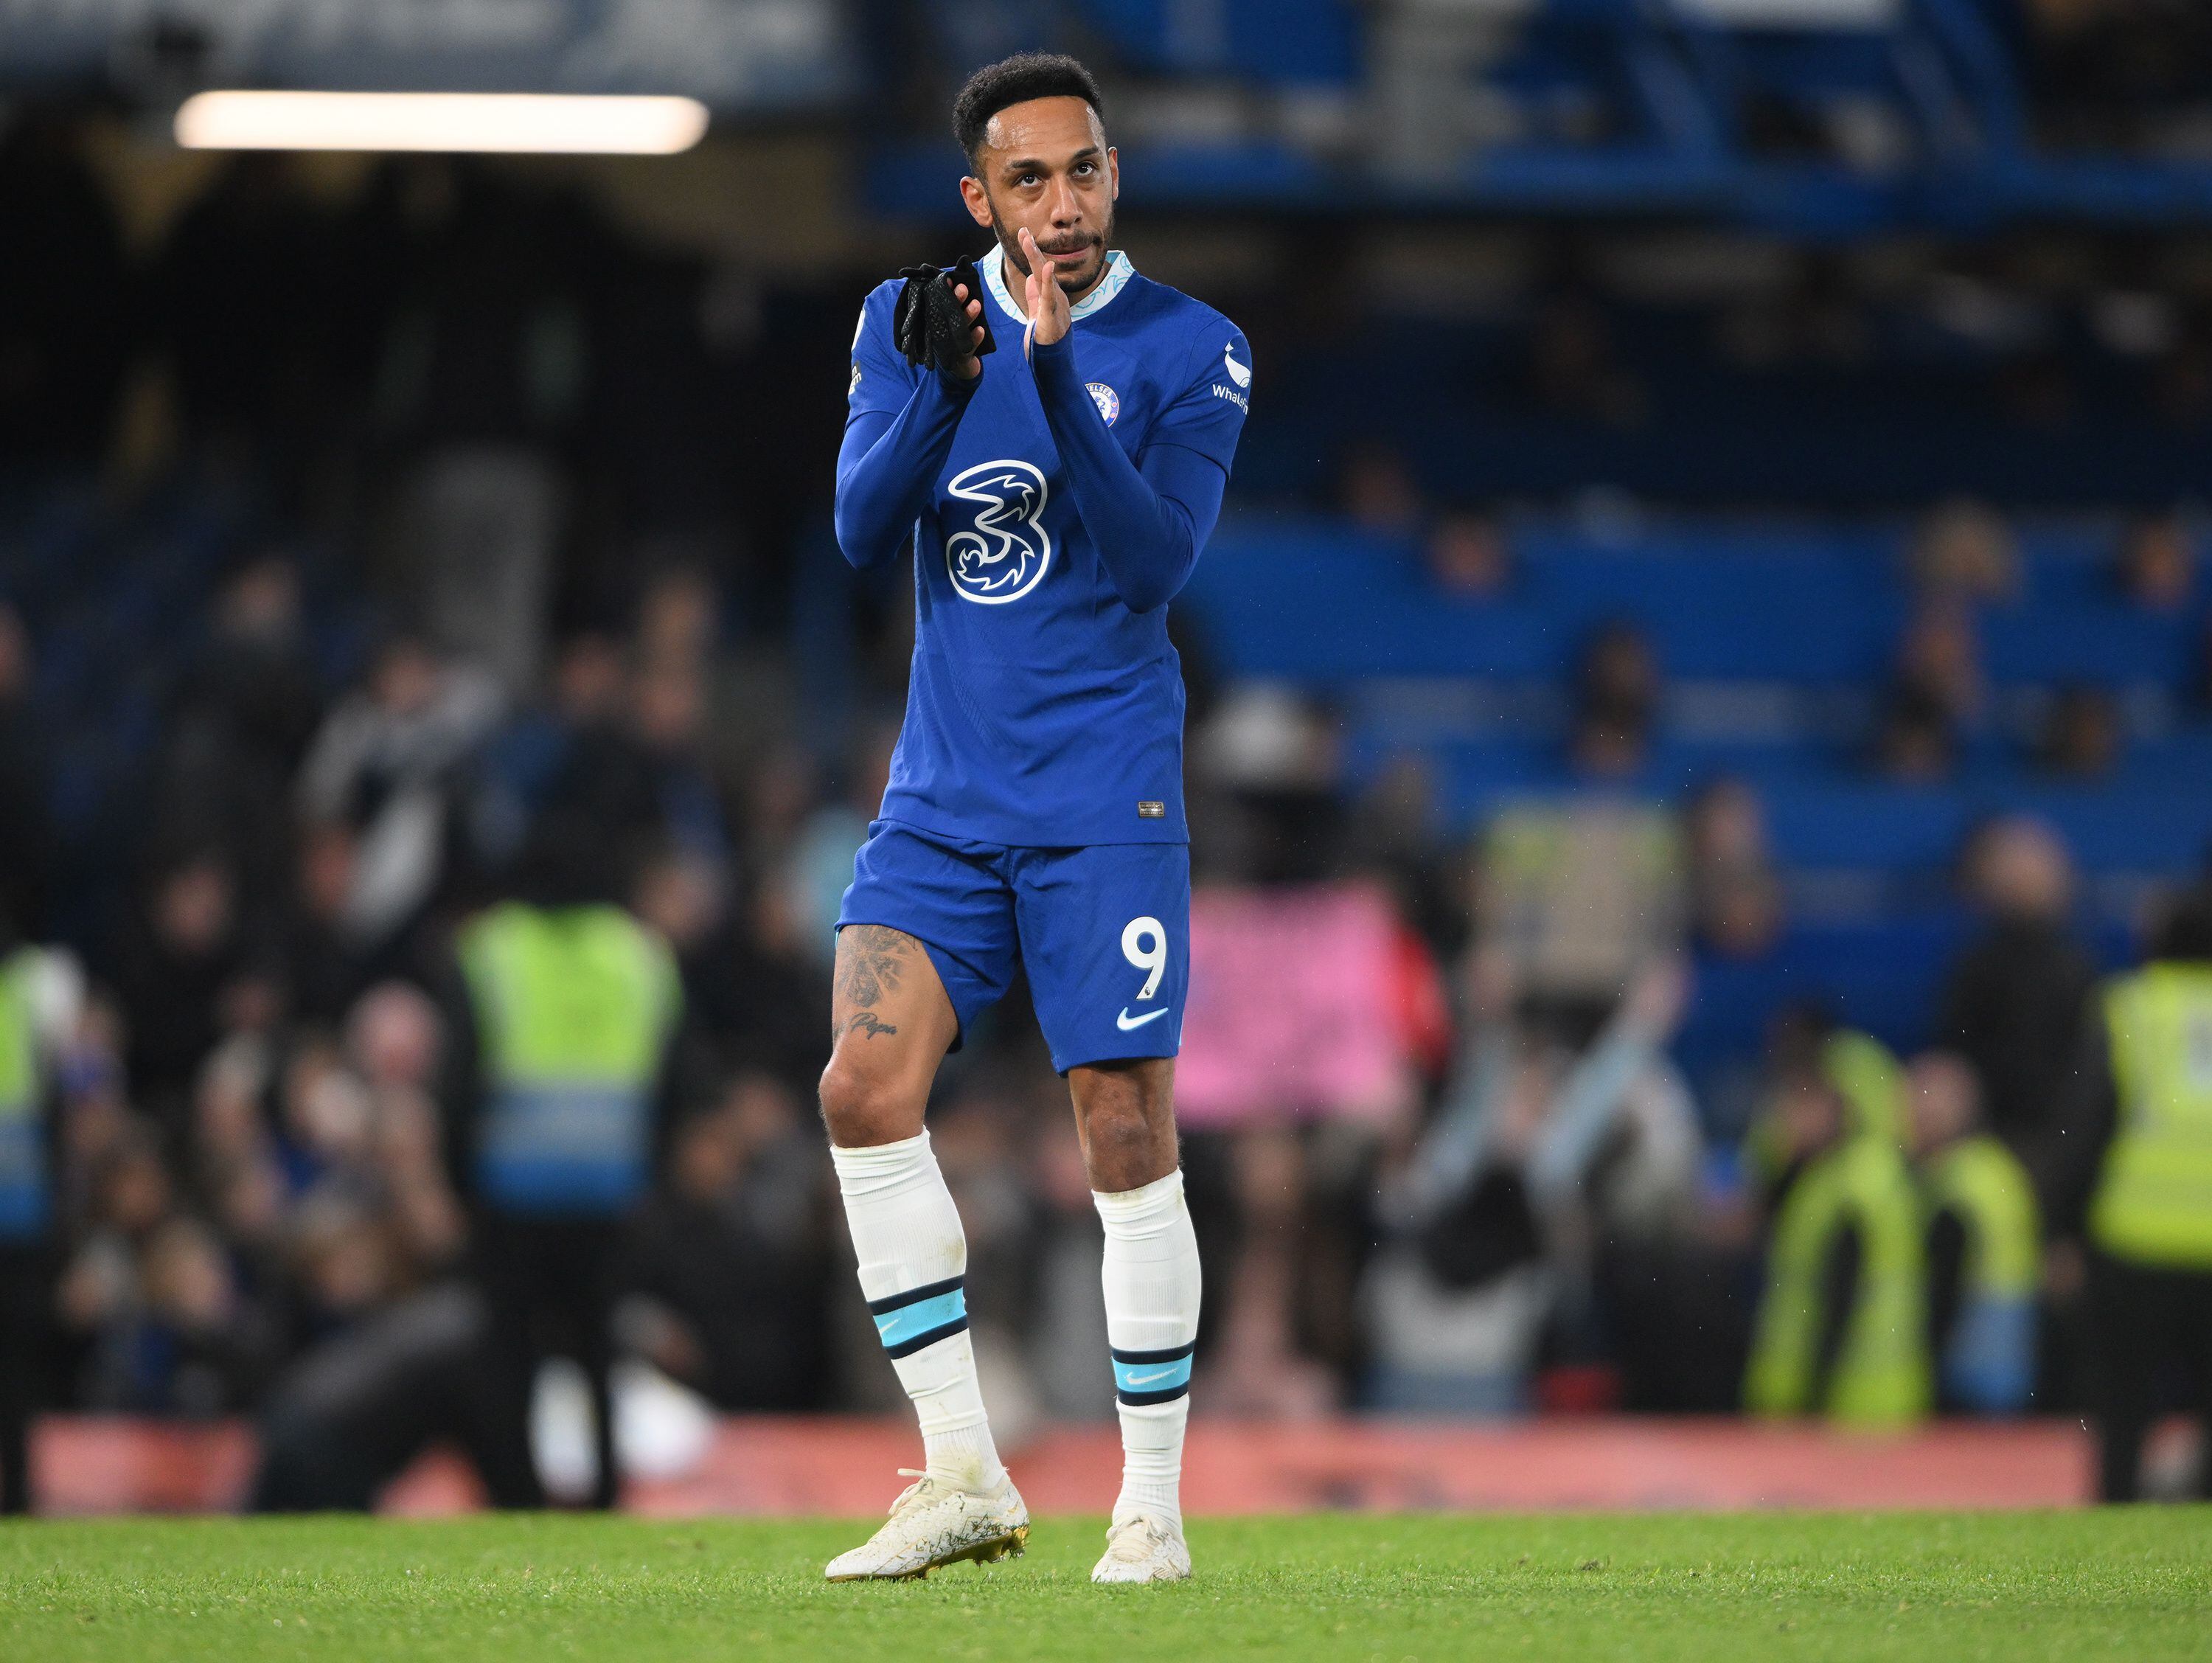 London (United Kingdom), 26/04/2023.- Chelsea's Pierre-Emerick Aubameyang reacts at full time during the English Premier League soccer match between Chelsea FC and Brentford FC in London, Britain, 26 April 2023. (Reino Unido, Londres) EFE/EPA/DANIEL HAMBURY EDITORIAL USE ONLY. No use with unauthorized audio, video, data, fixture lists, club/league logos or 'live' services. Online in-match use limited to 120 images, no video emulation. No use in betting, games or single club/league/player publications.
